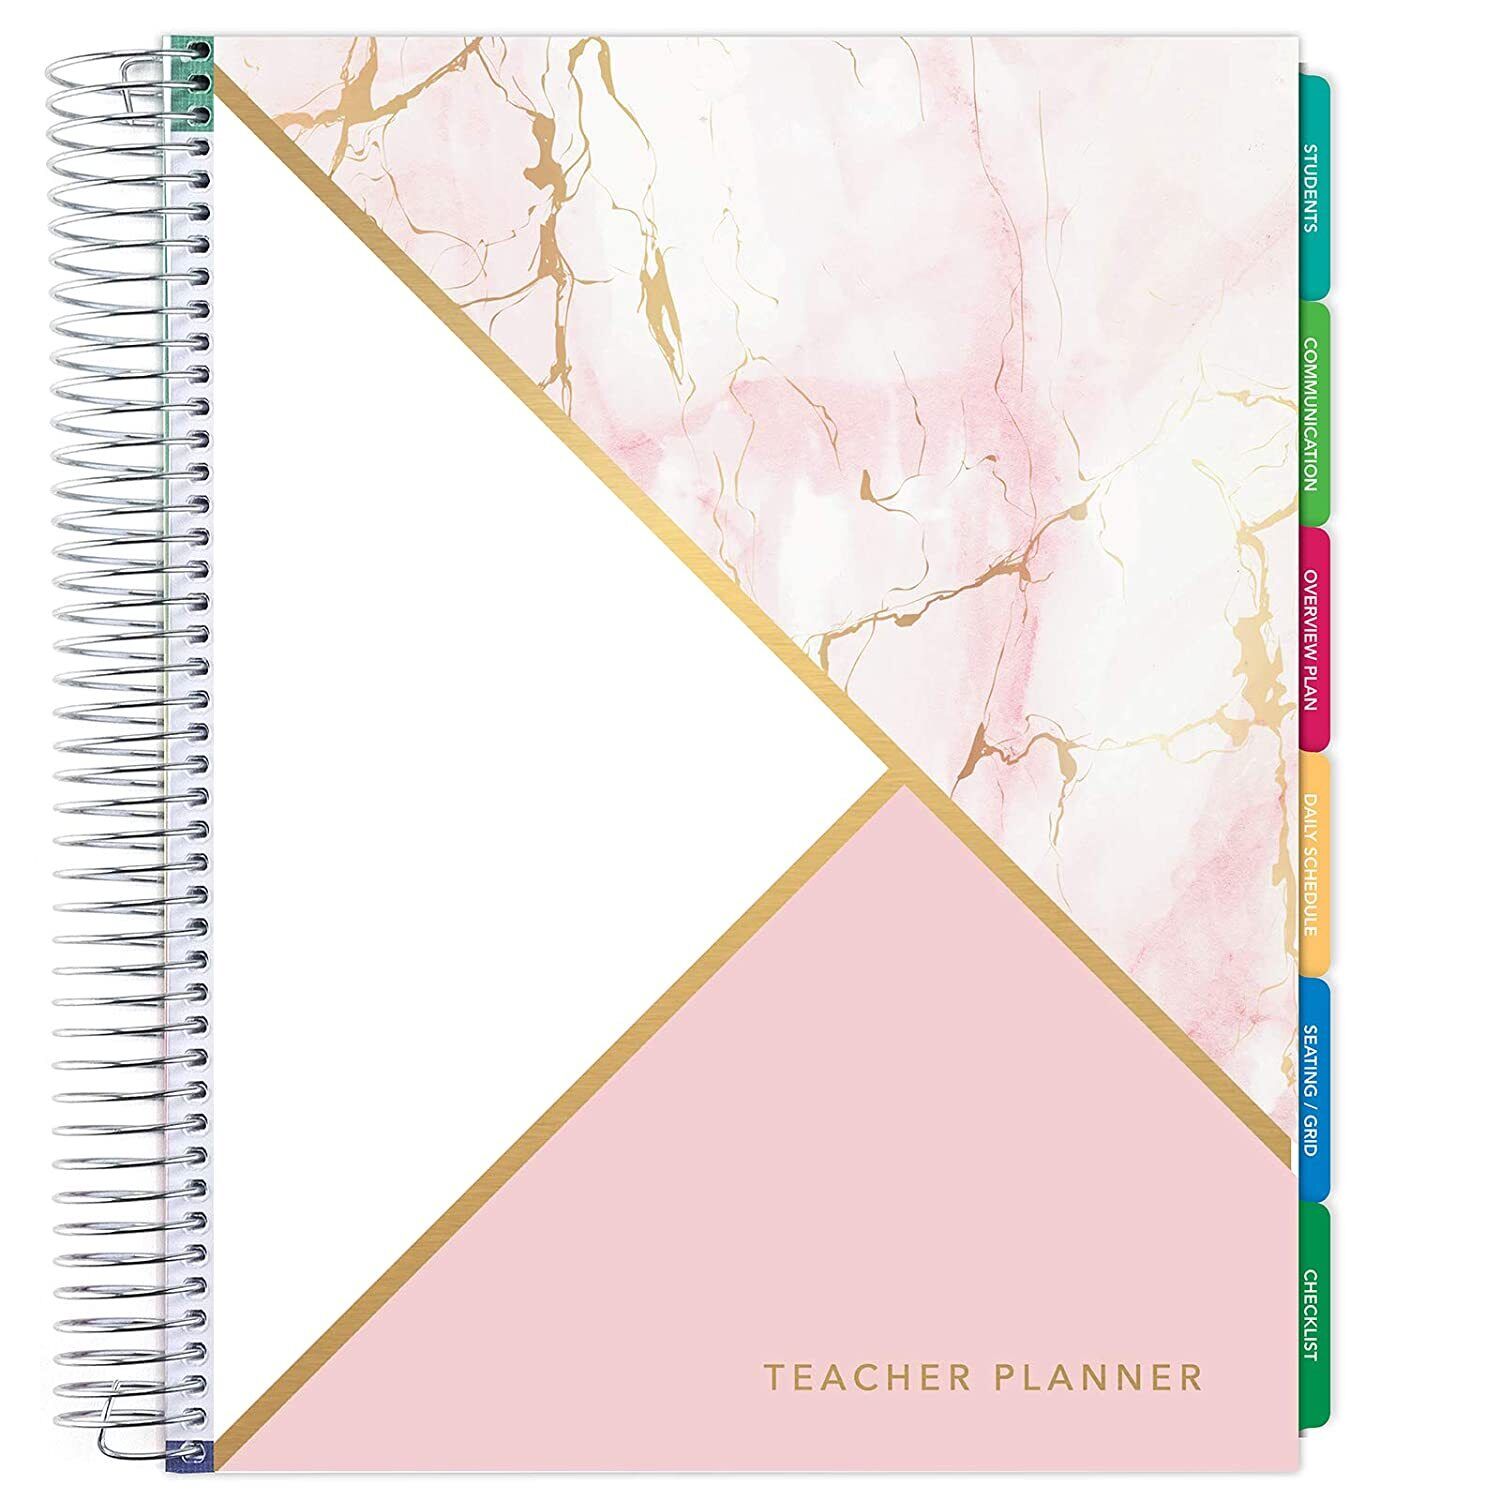 Deluxe Undated Teacher Planner: 8.5"x11" Includes 7 Periods, Page Tabs, Bookm�